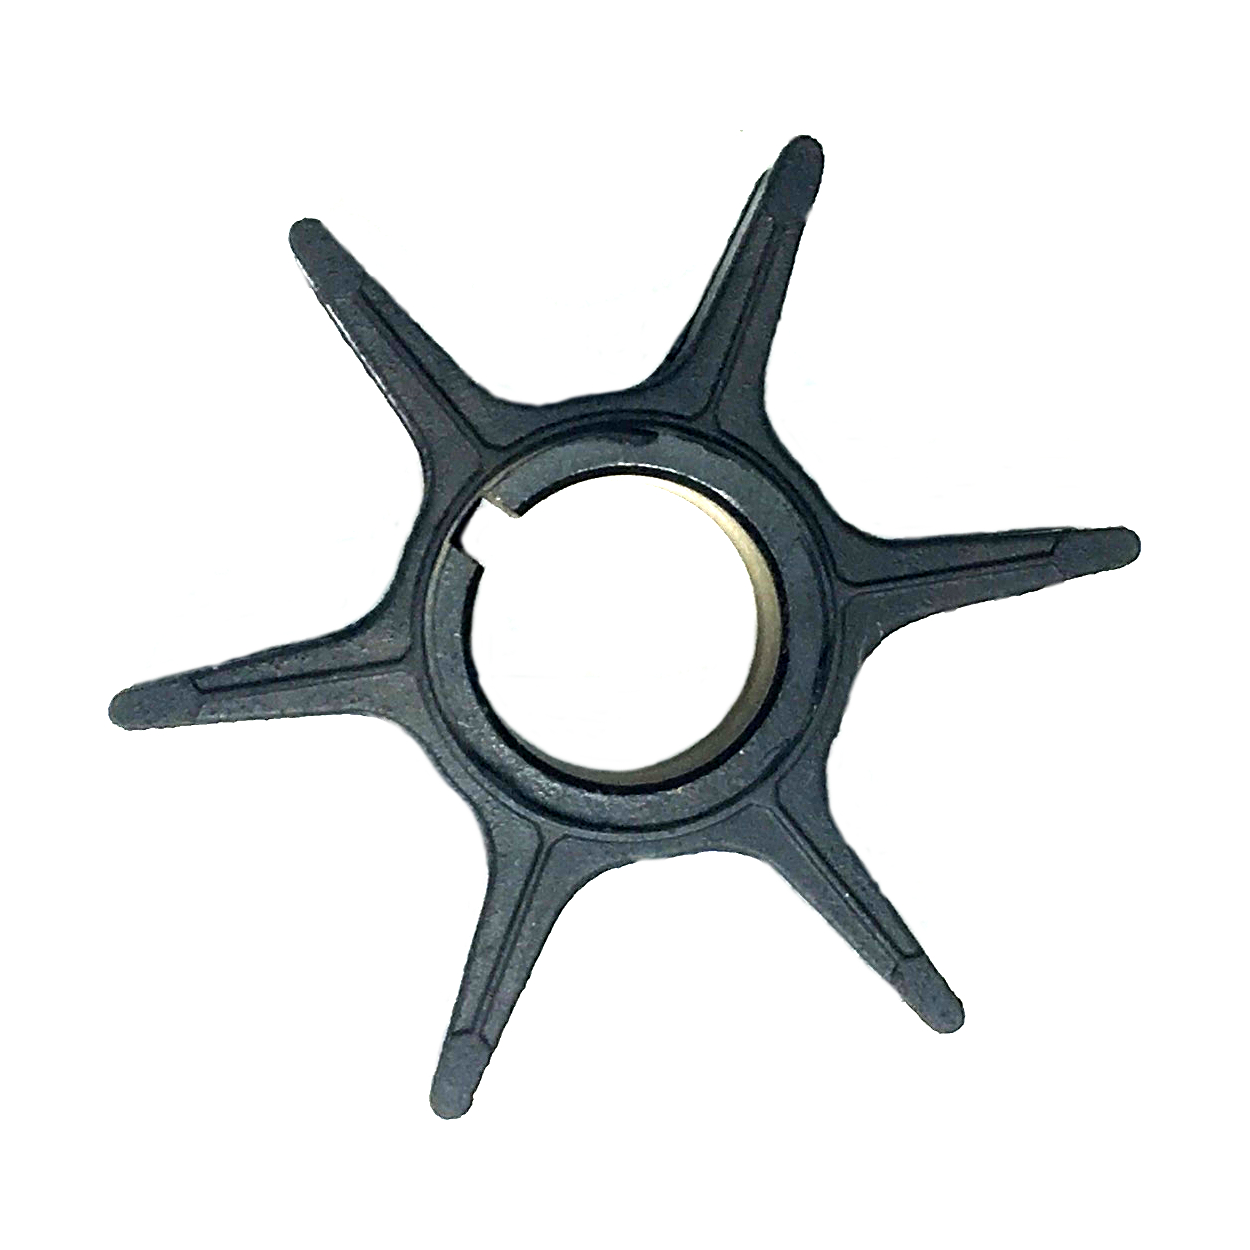 Outboard water pump impeller 17461-95300 replacement for SUZUKI marine 